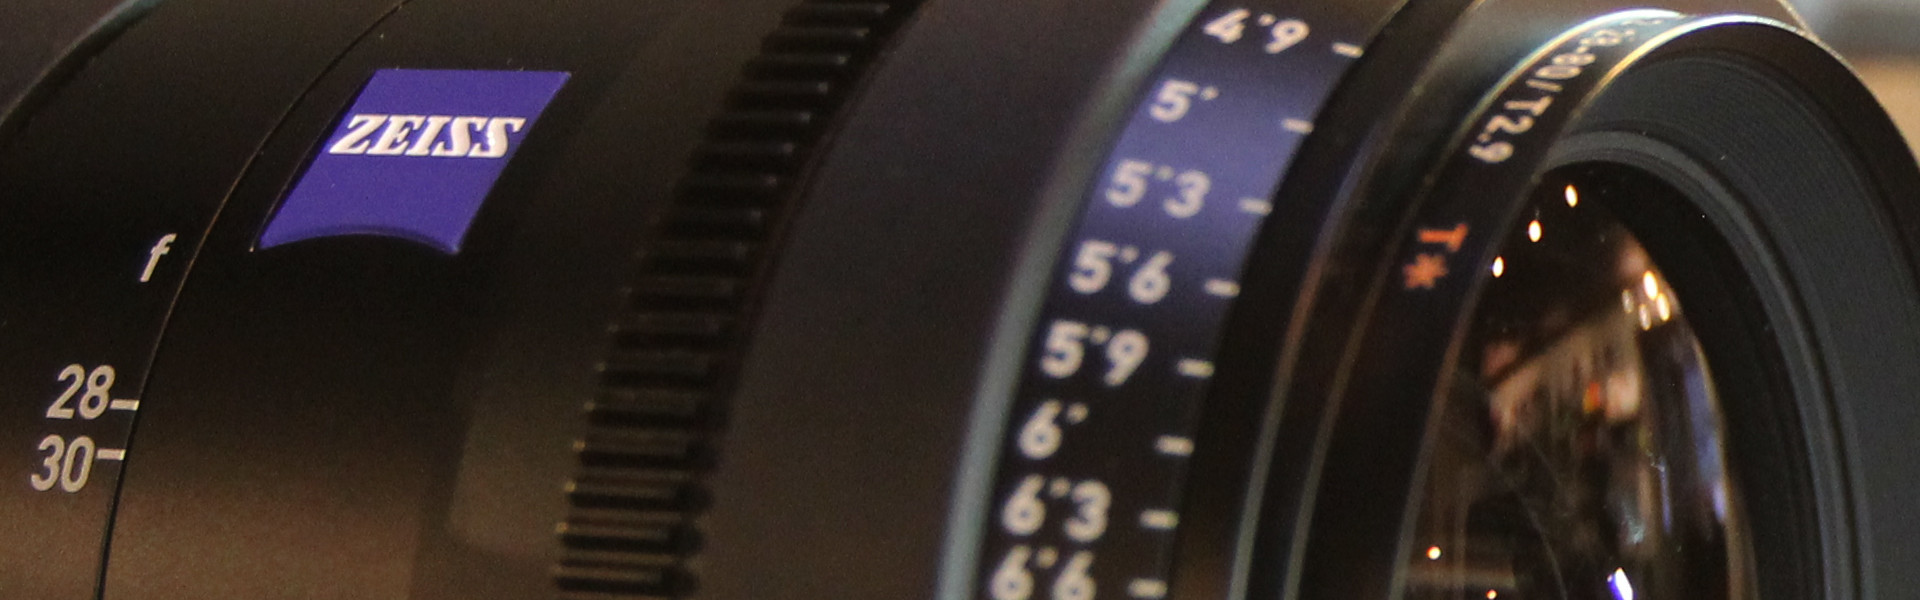 Header image for article Zeiss Announces Two New CP.2 Lenses